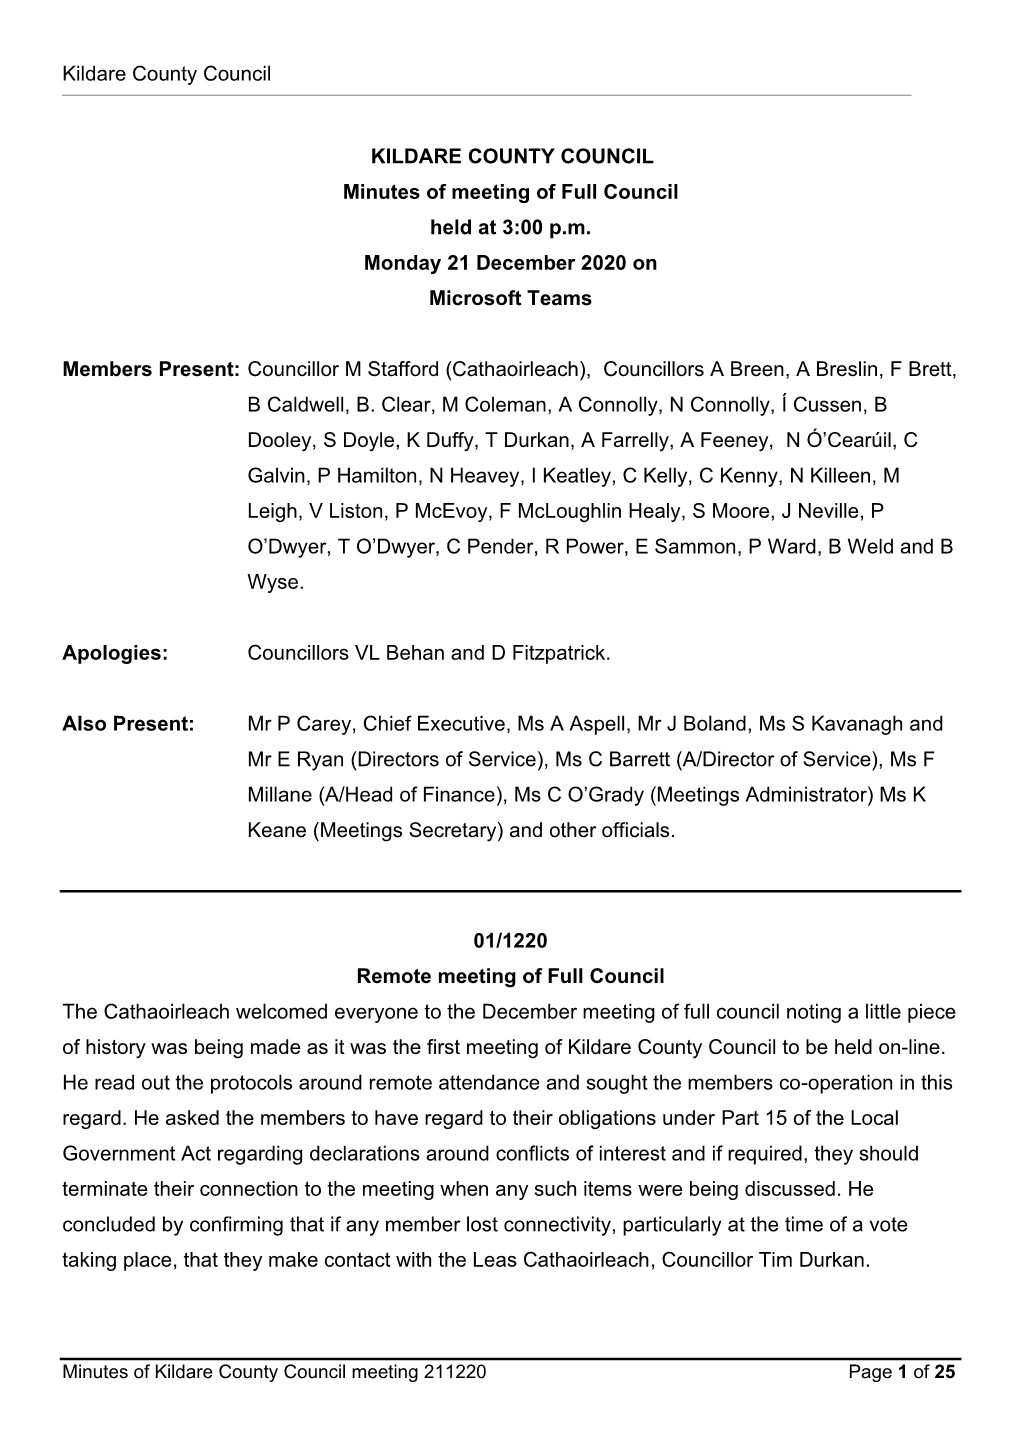 Minutes for Kildare County Council Meeting 21 December